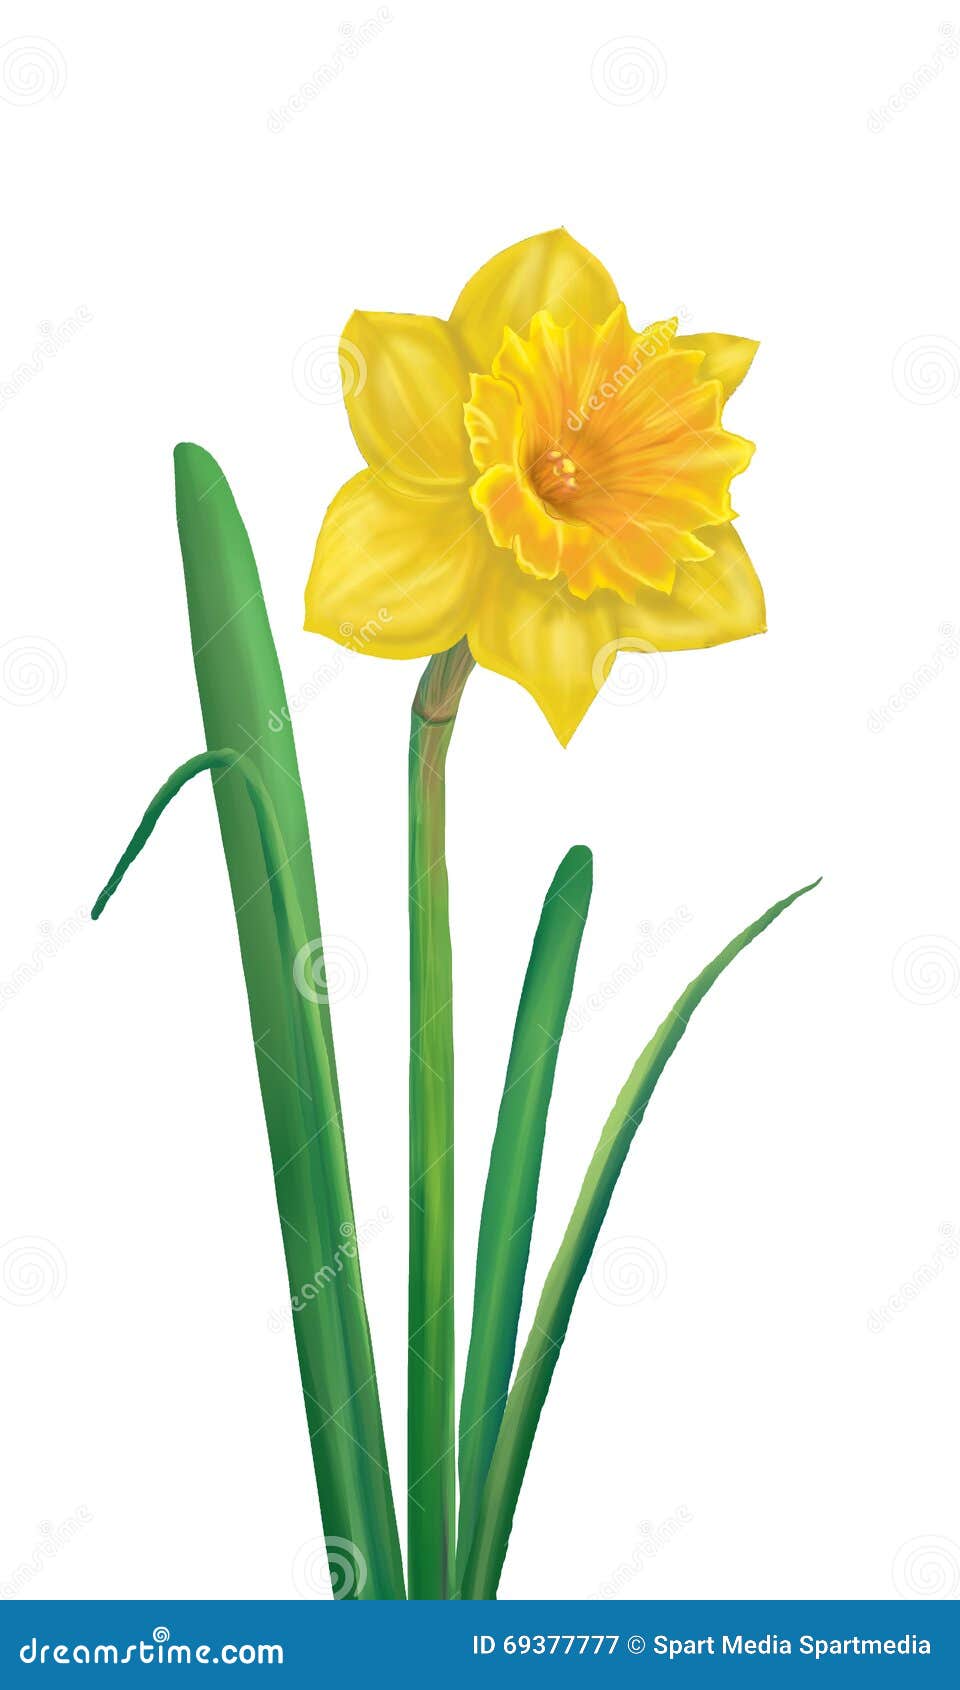 Daffodil Yellow flower stock illustration. Image of narcissus - 69377777